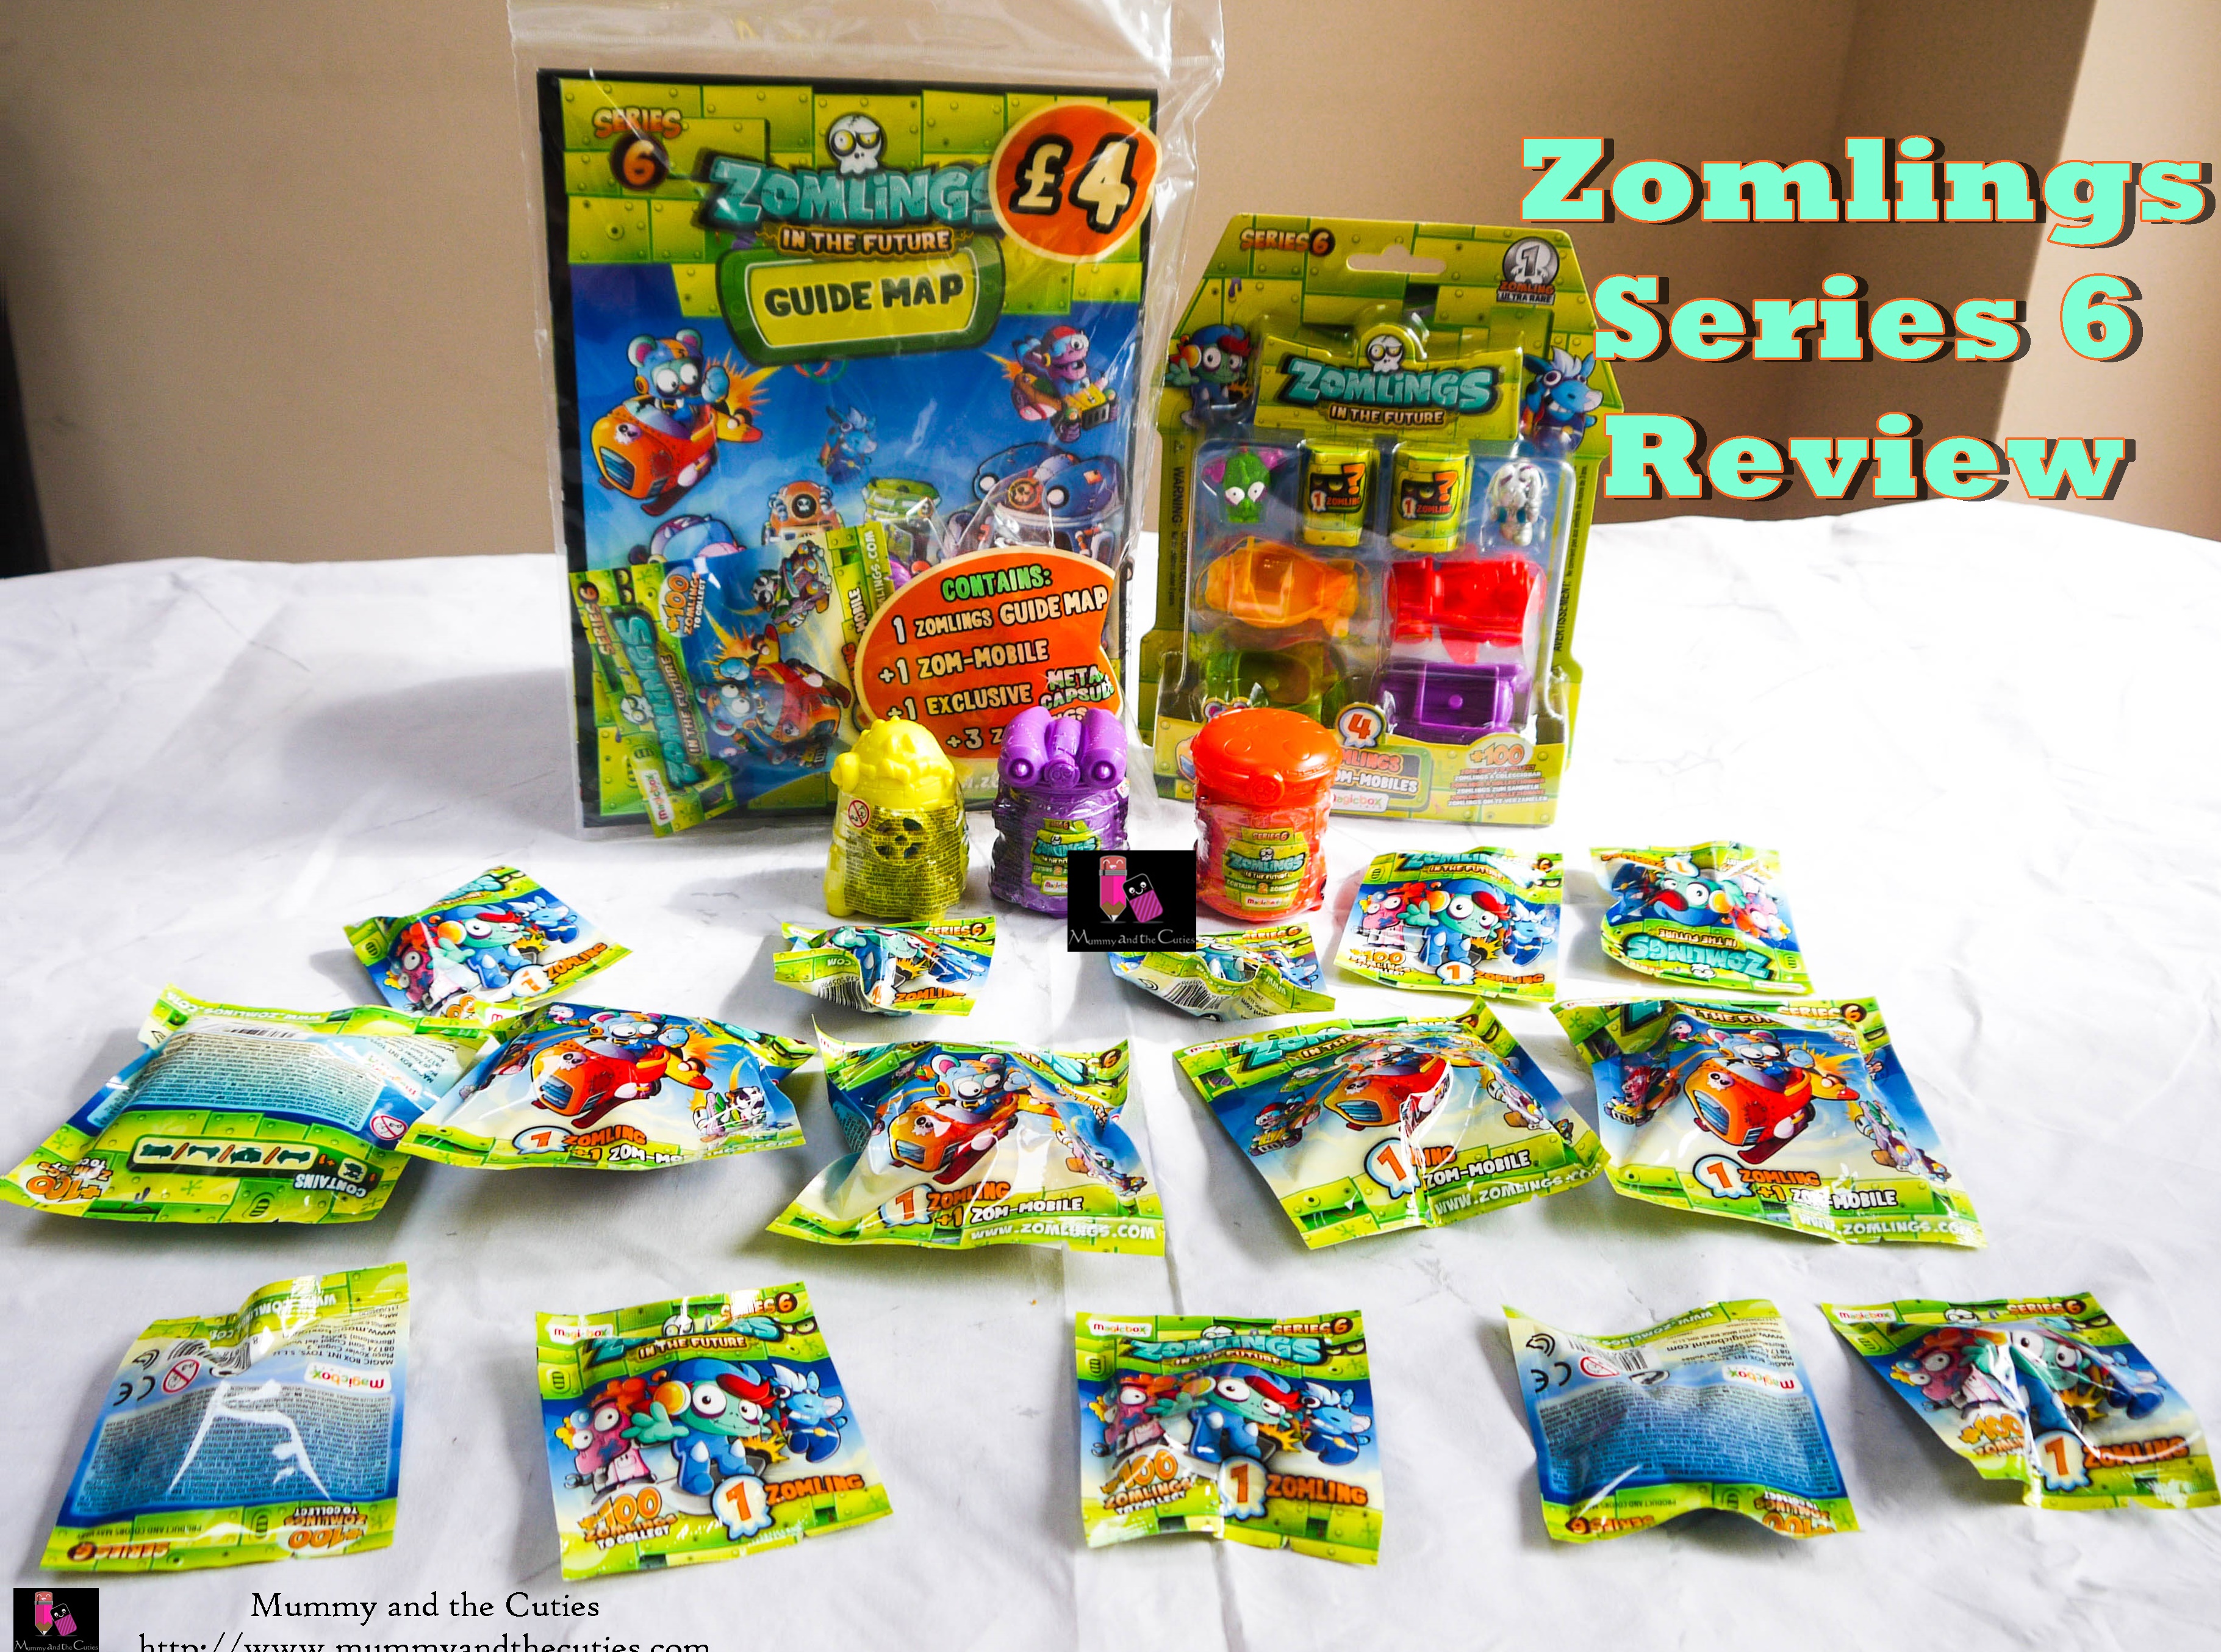 Zomlings Series 6 – Review